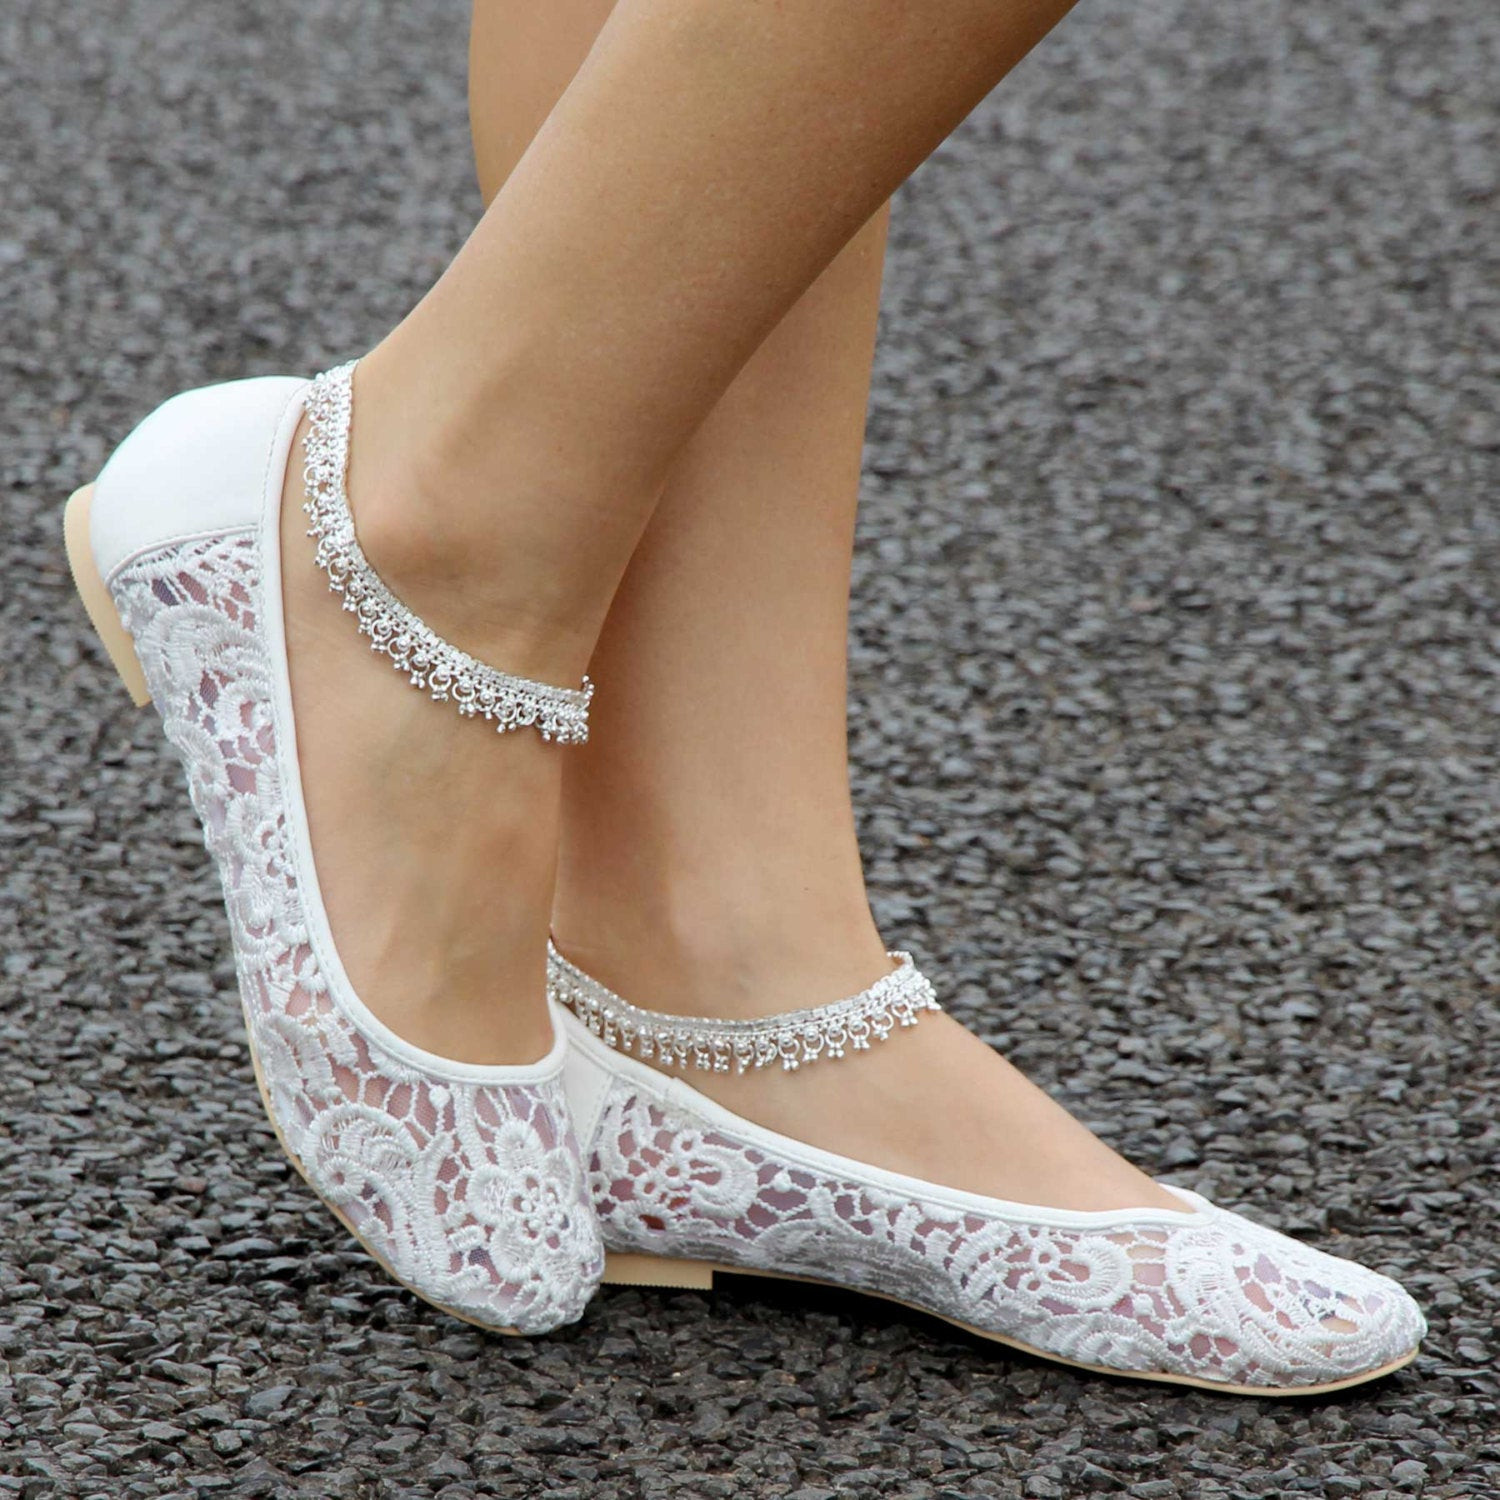 Wedding Flat Shoes For Bride
 Unavailable Listing on Etsy